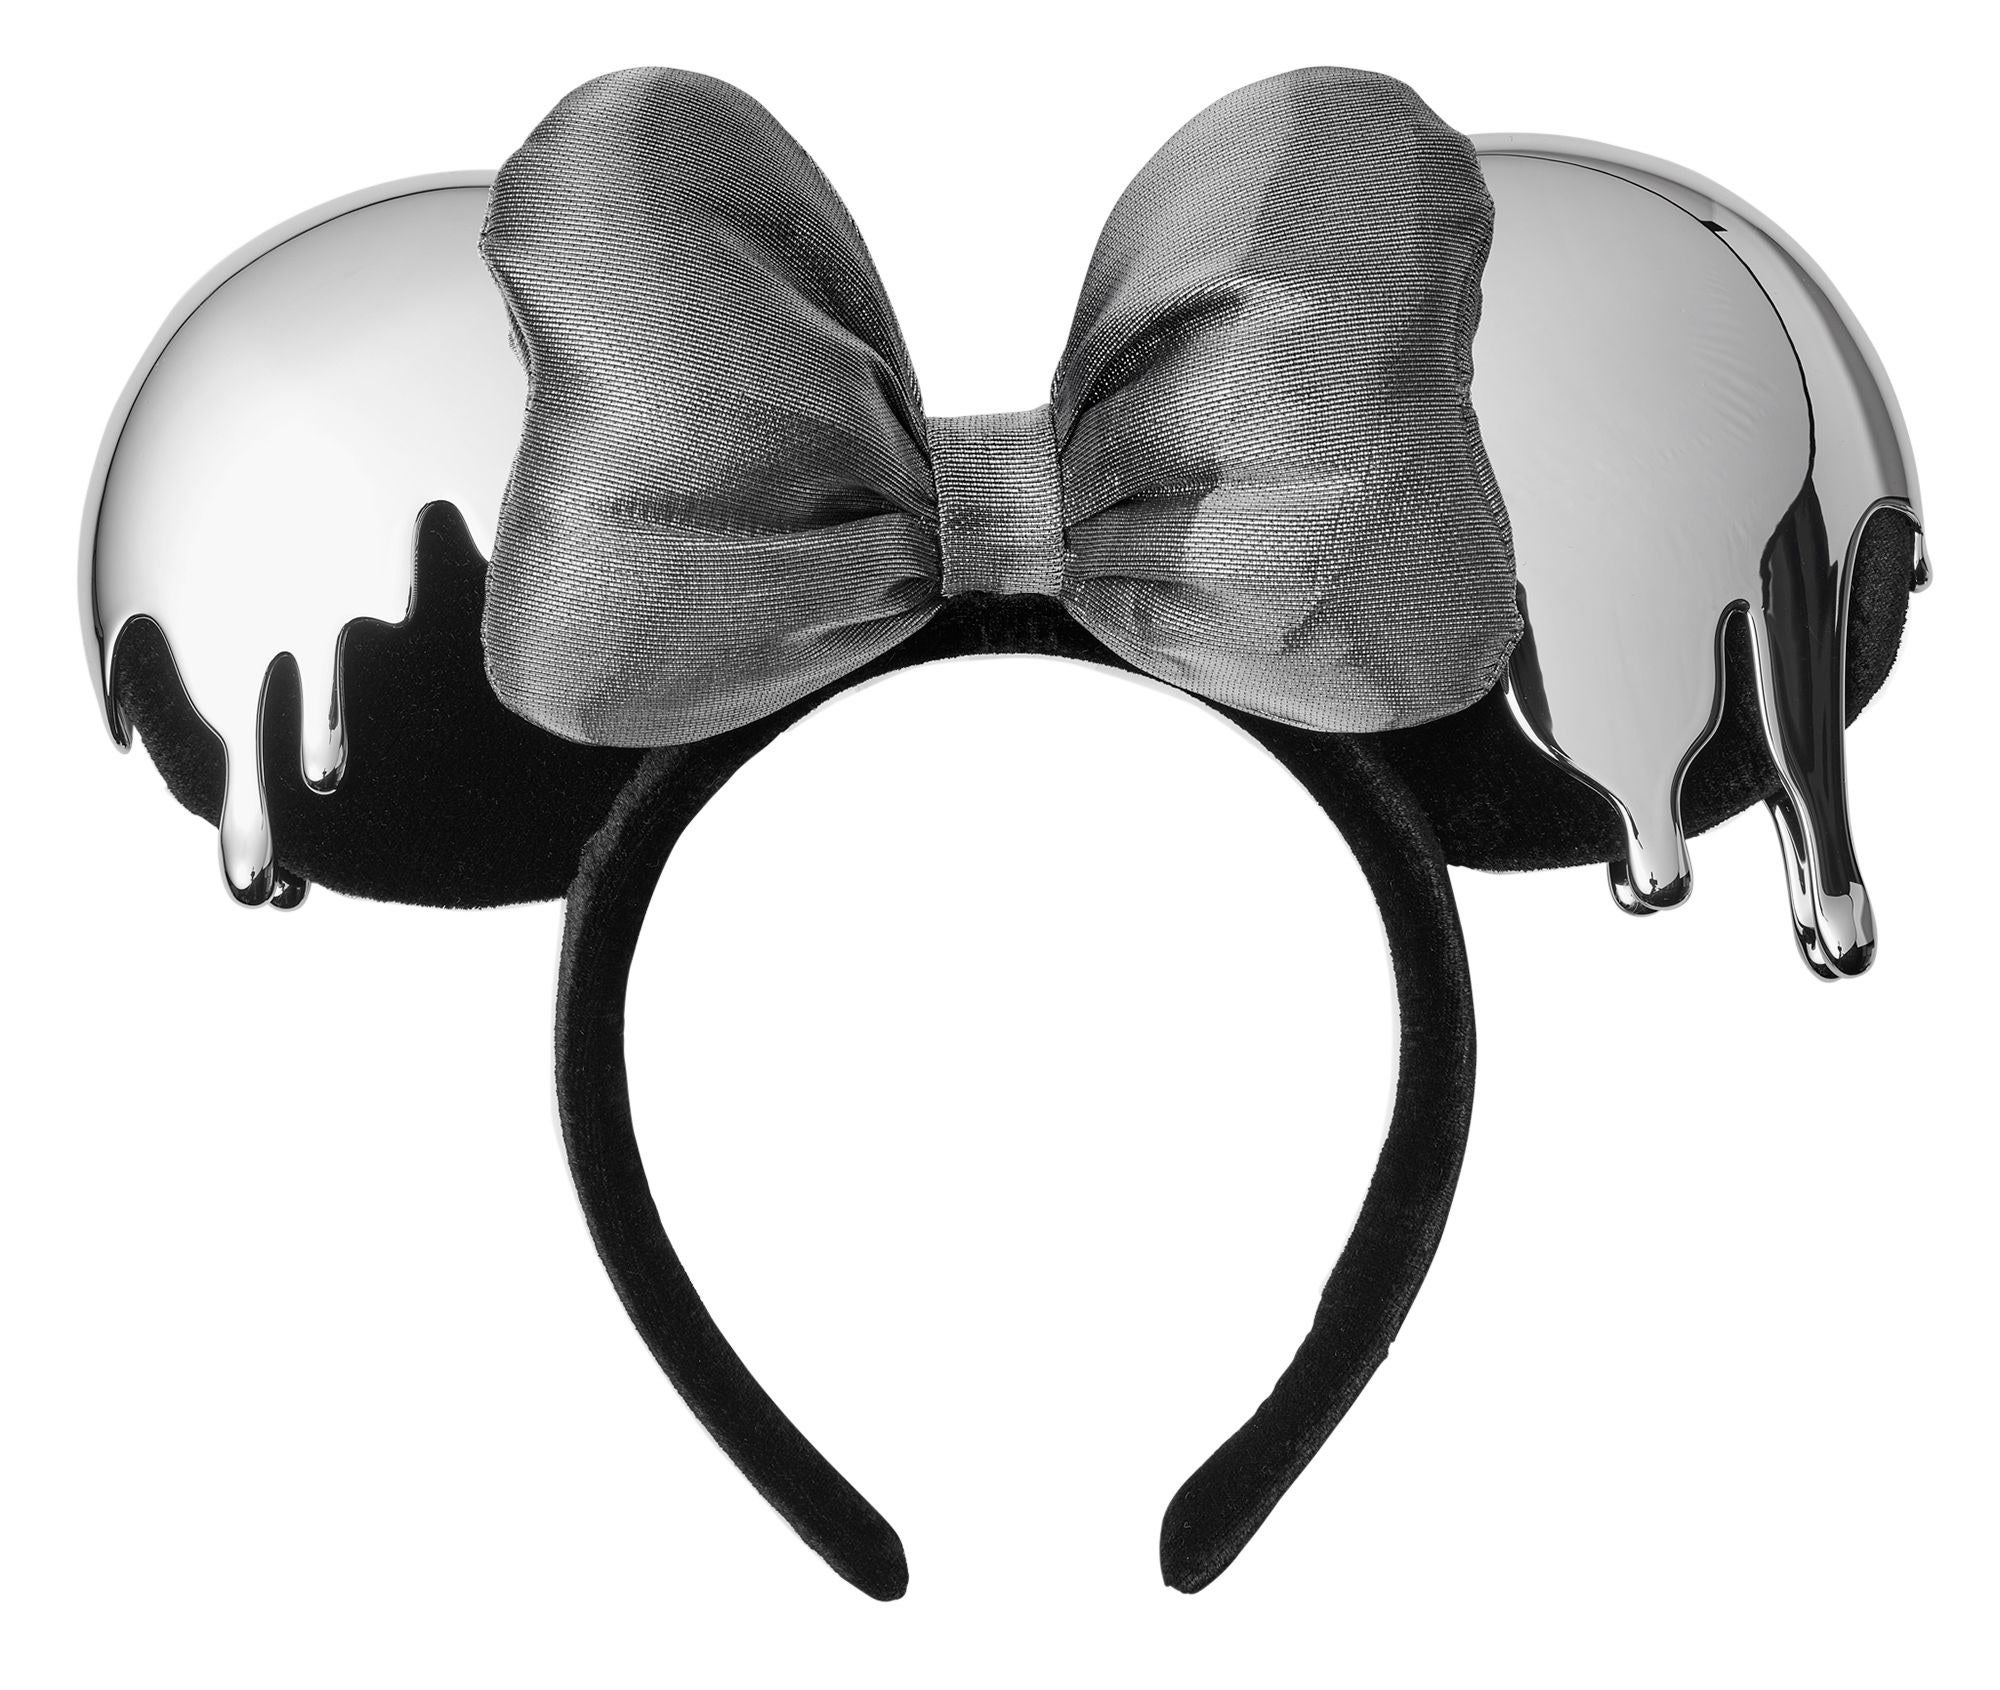 Minnie Mouse ears with platinum dripping designs on the ears